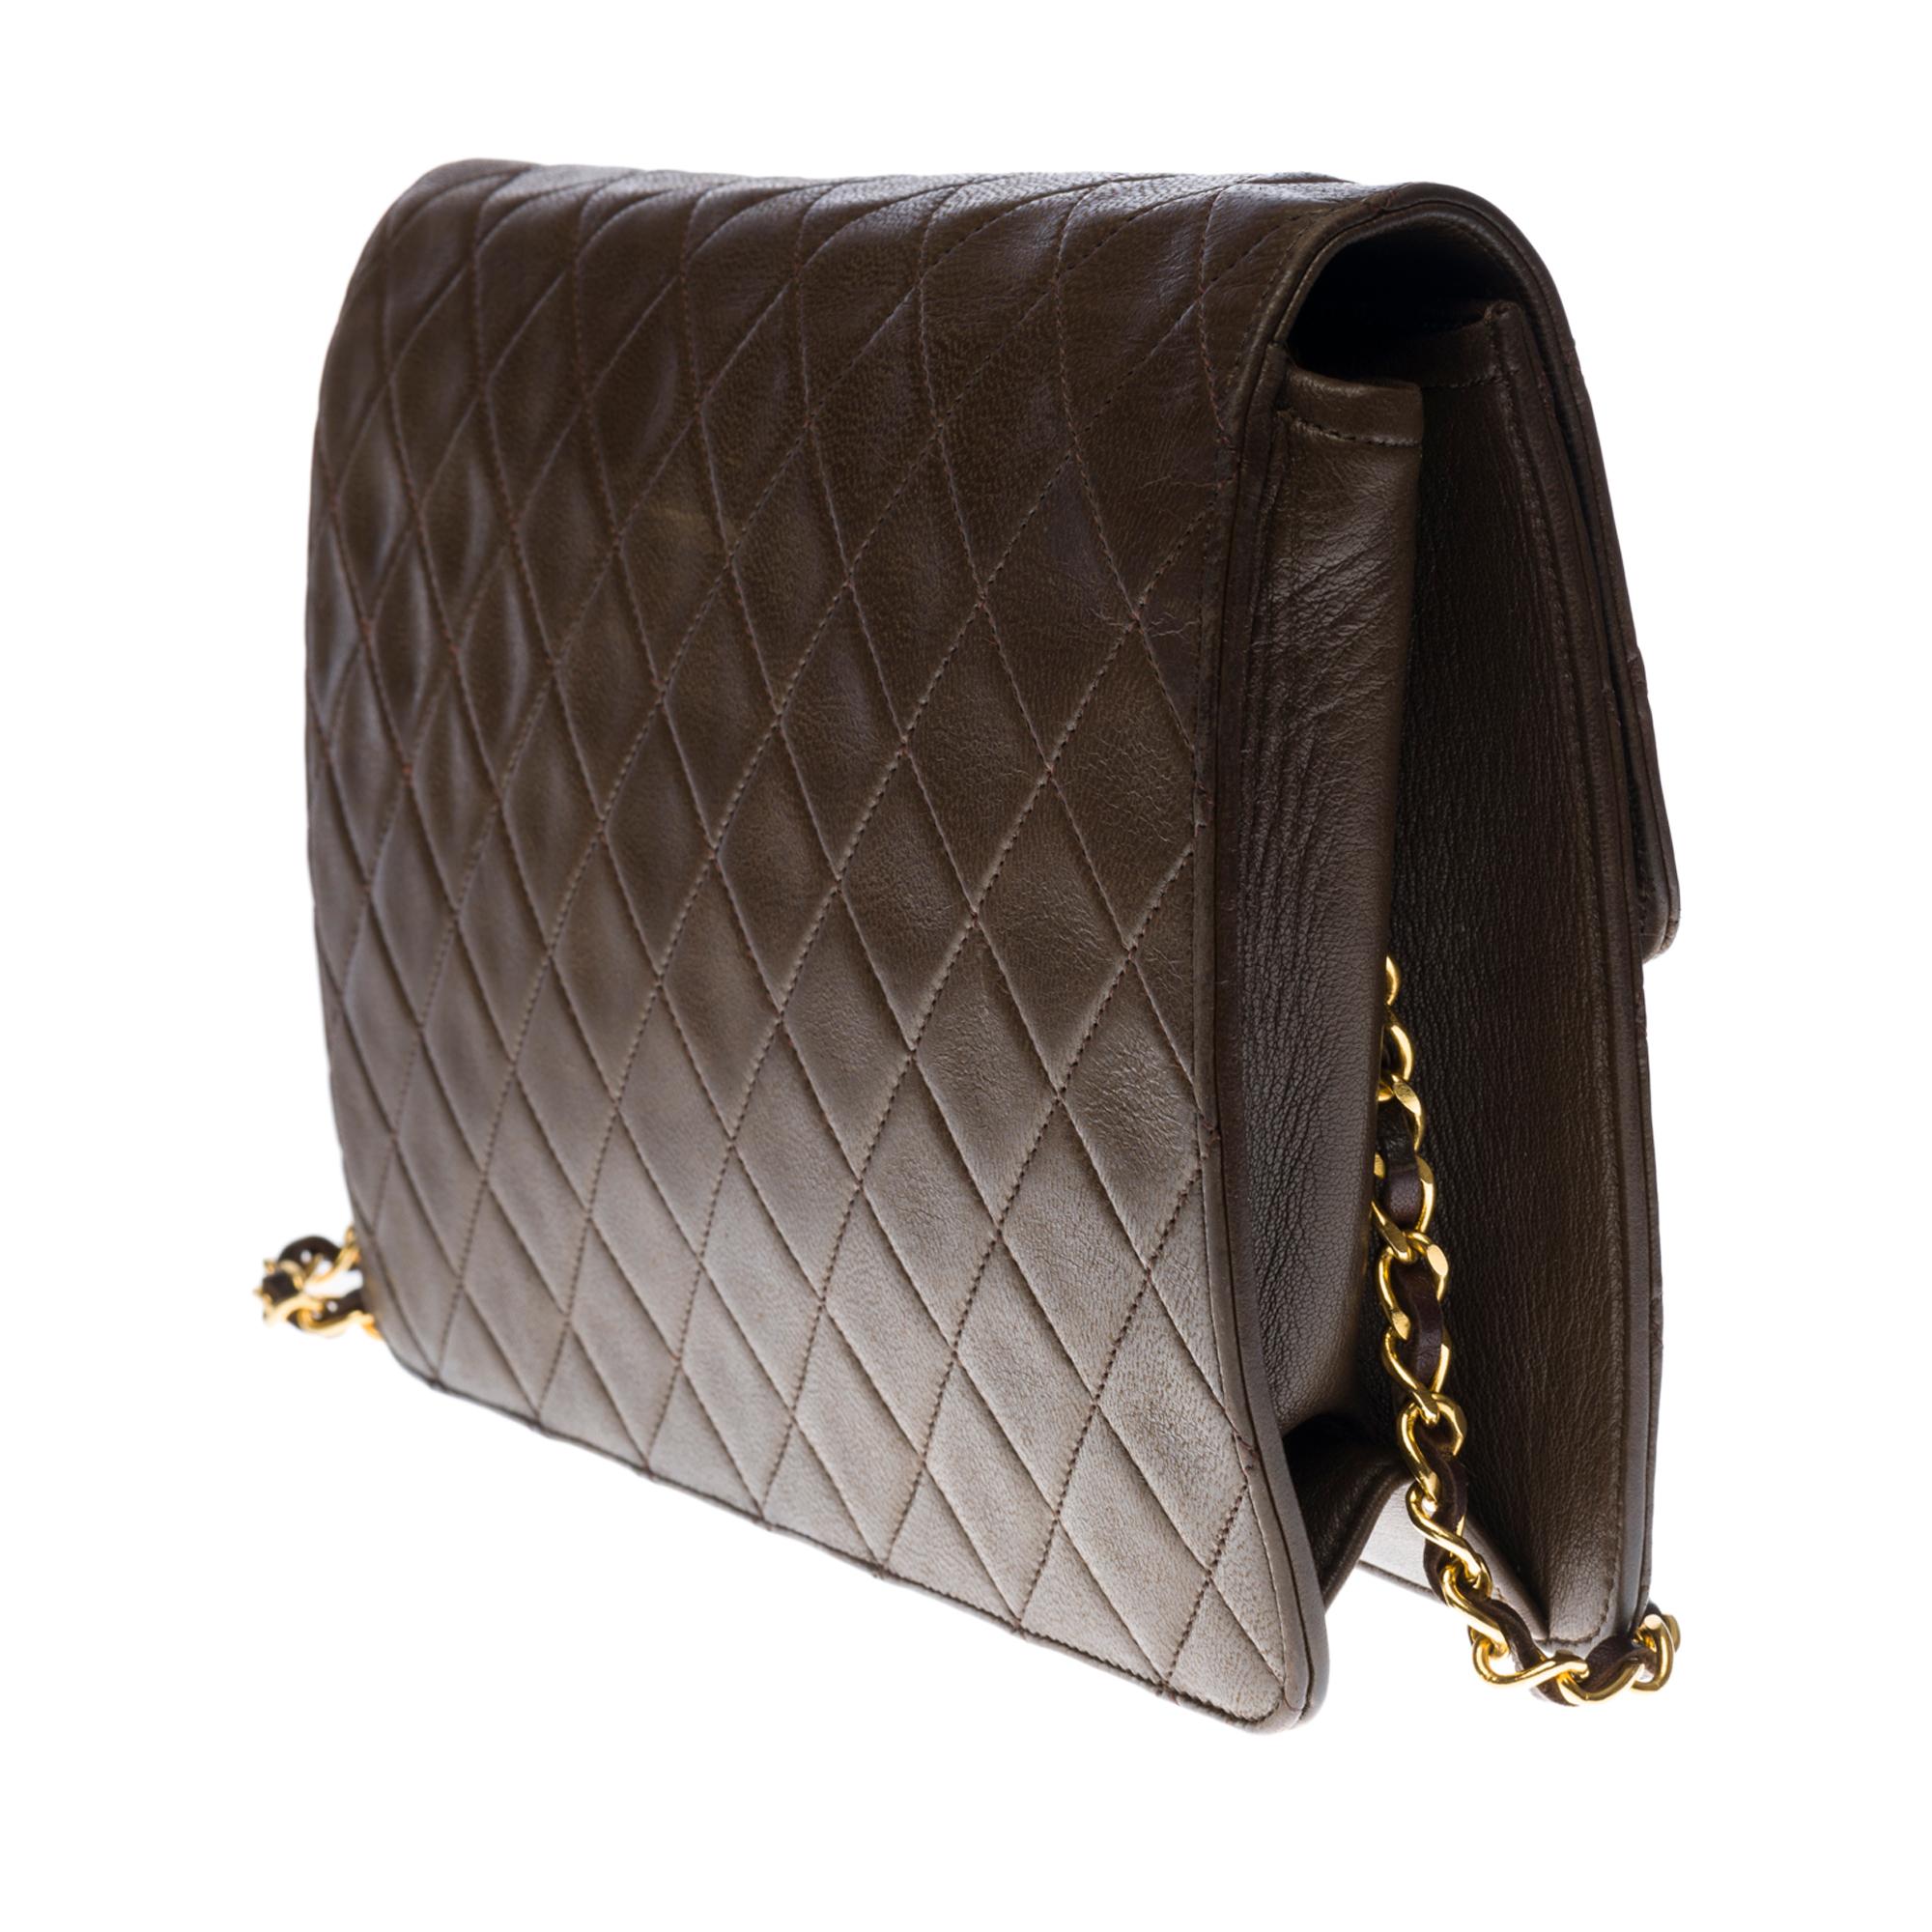 Women's Chanel Classic shoulder Flap bag in Khaki quilted lambskin and gold hardware